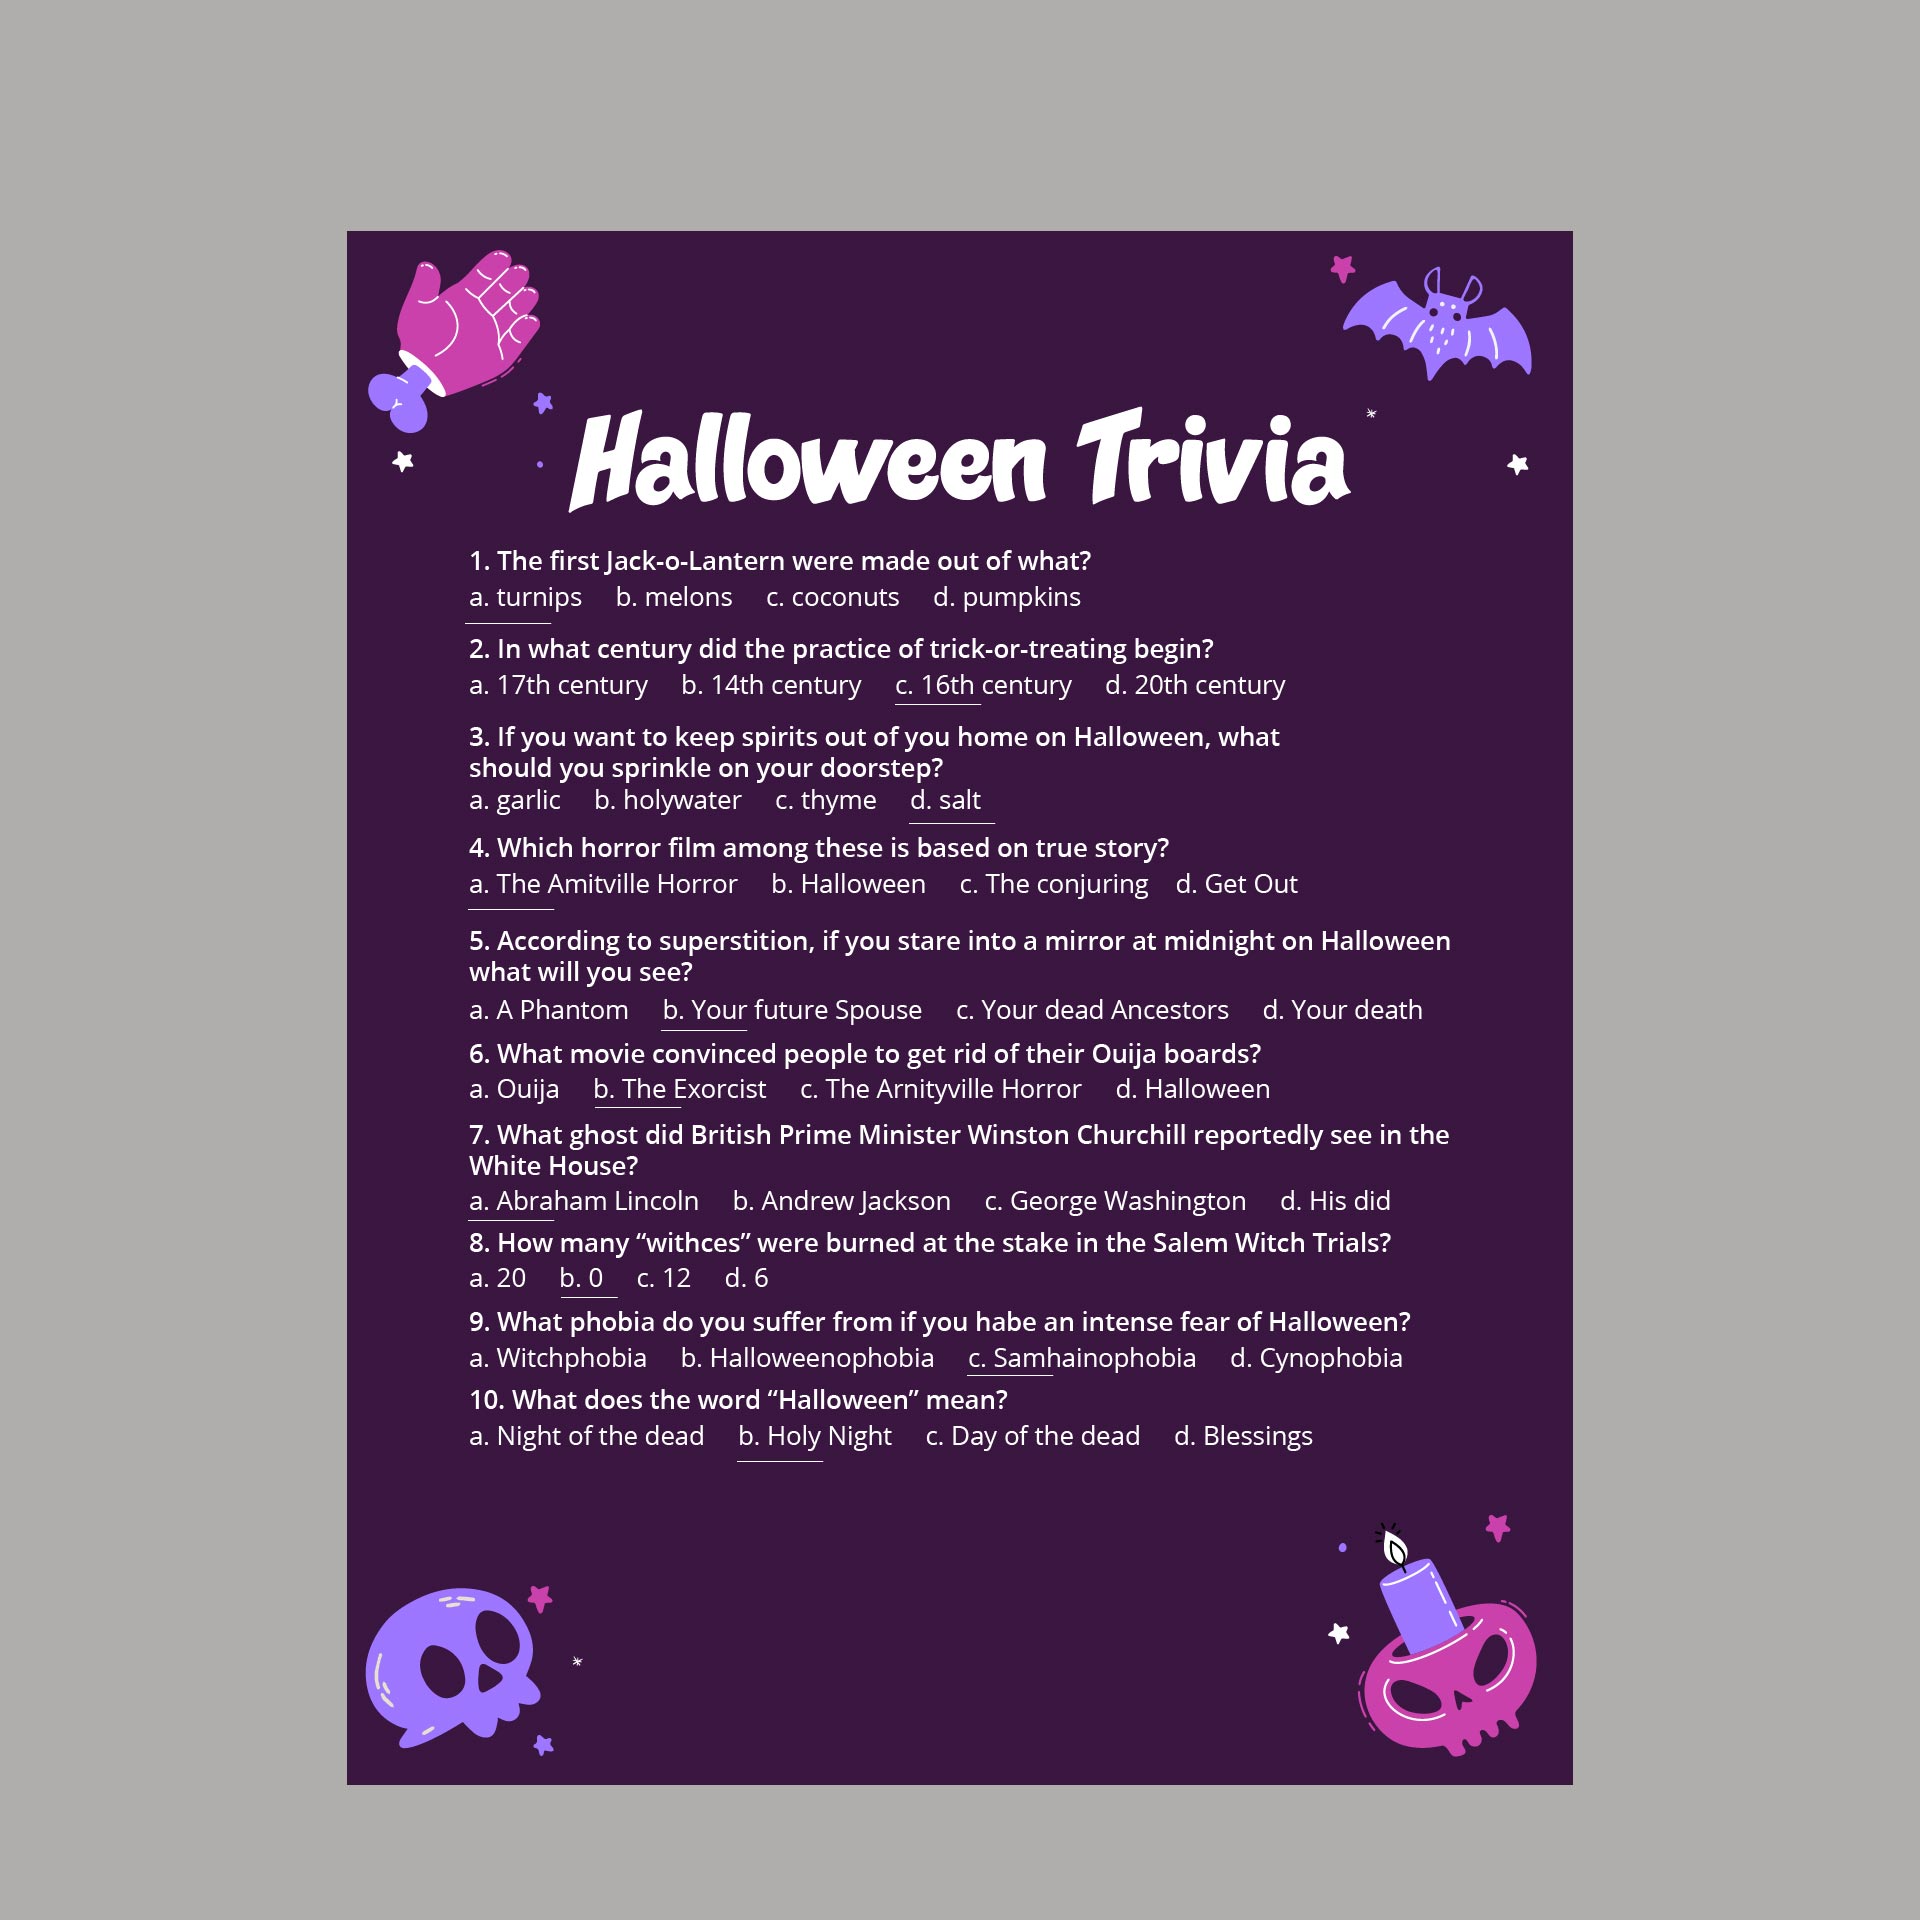 Halloween Movie Trivia Questions And Answers